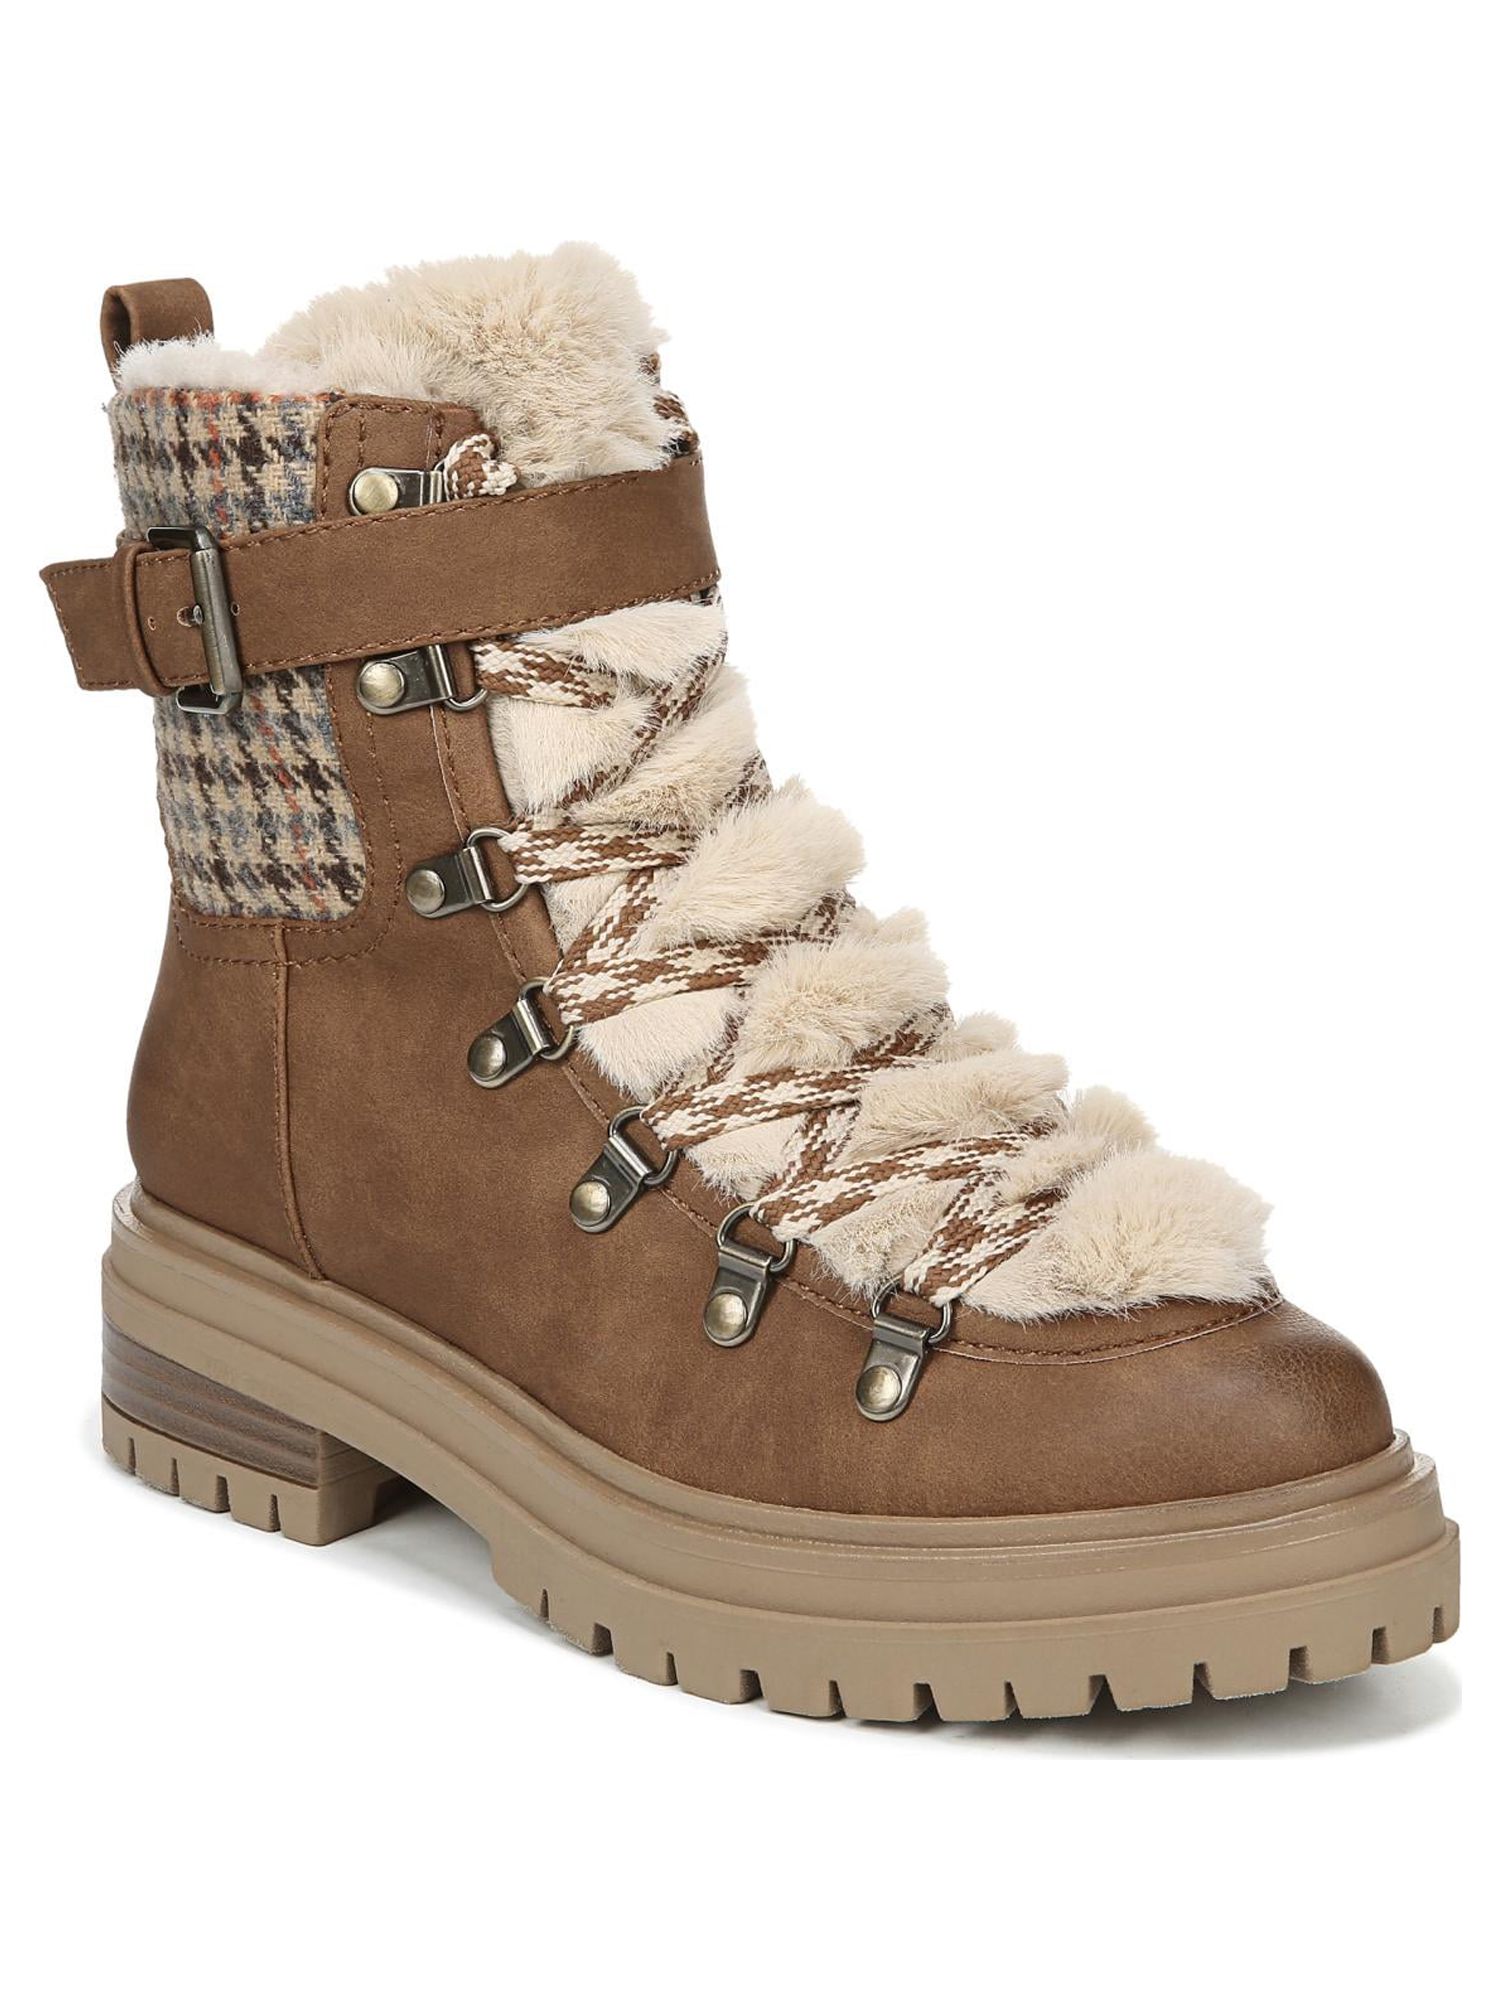 Circus by Sam Edelman Women's Gretchen Shearling Hiker Boot - image 1 of 8